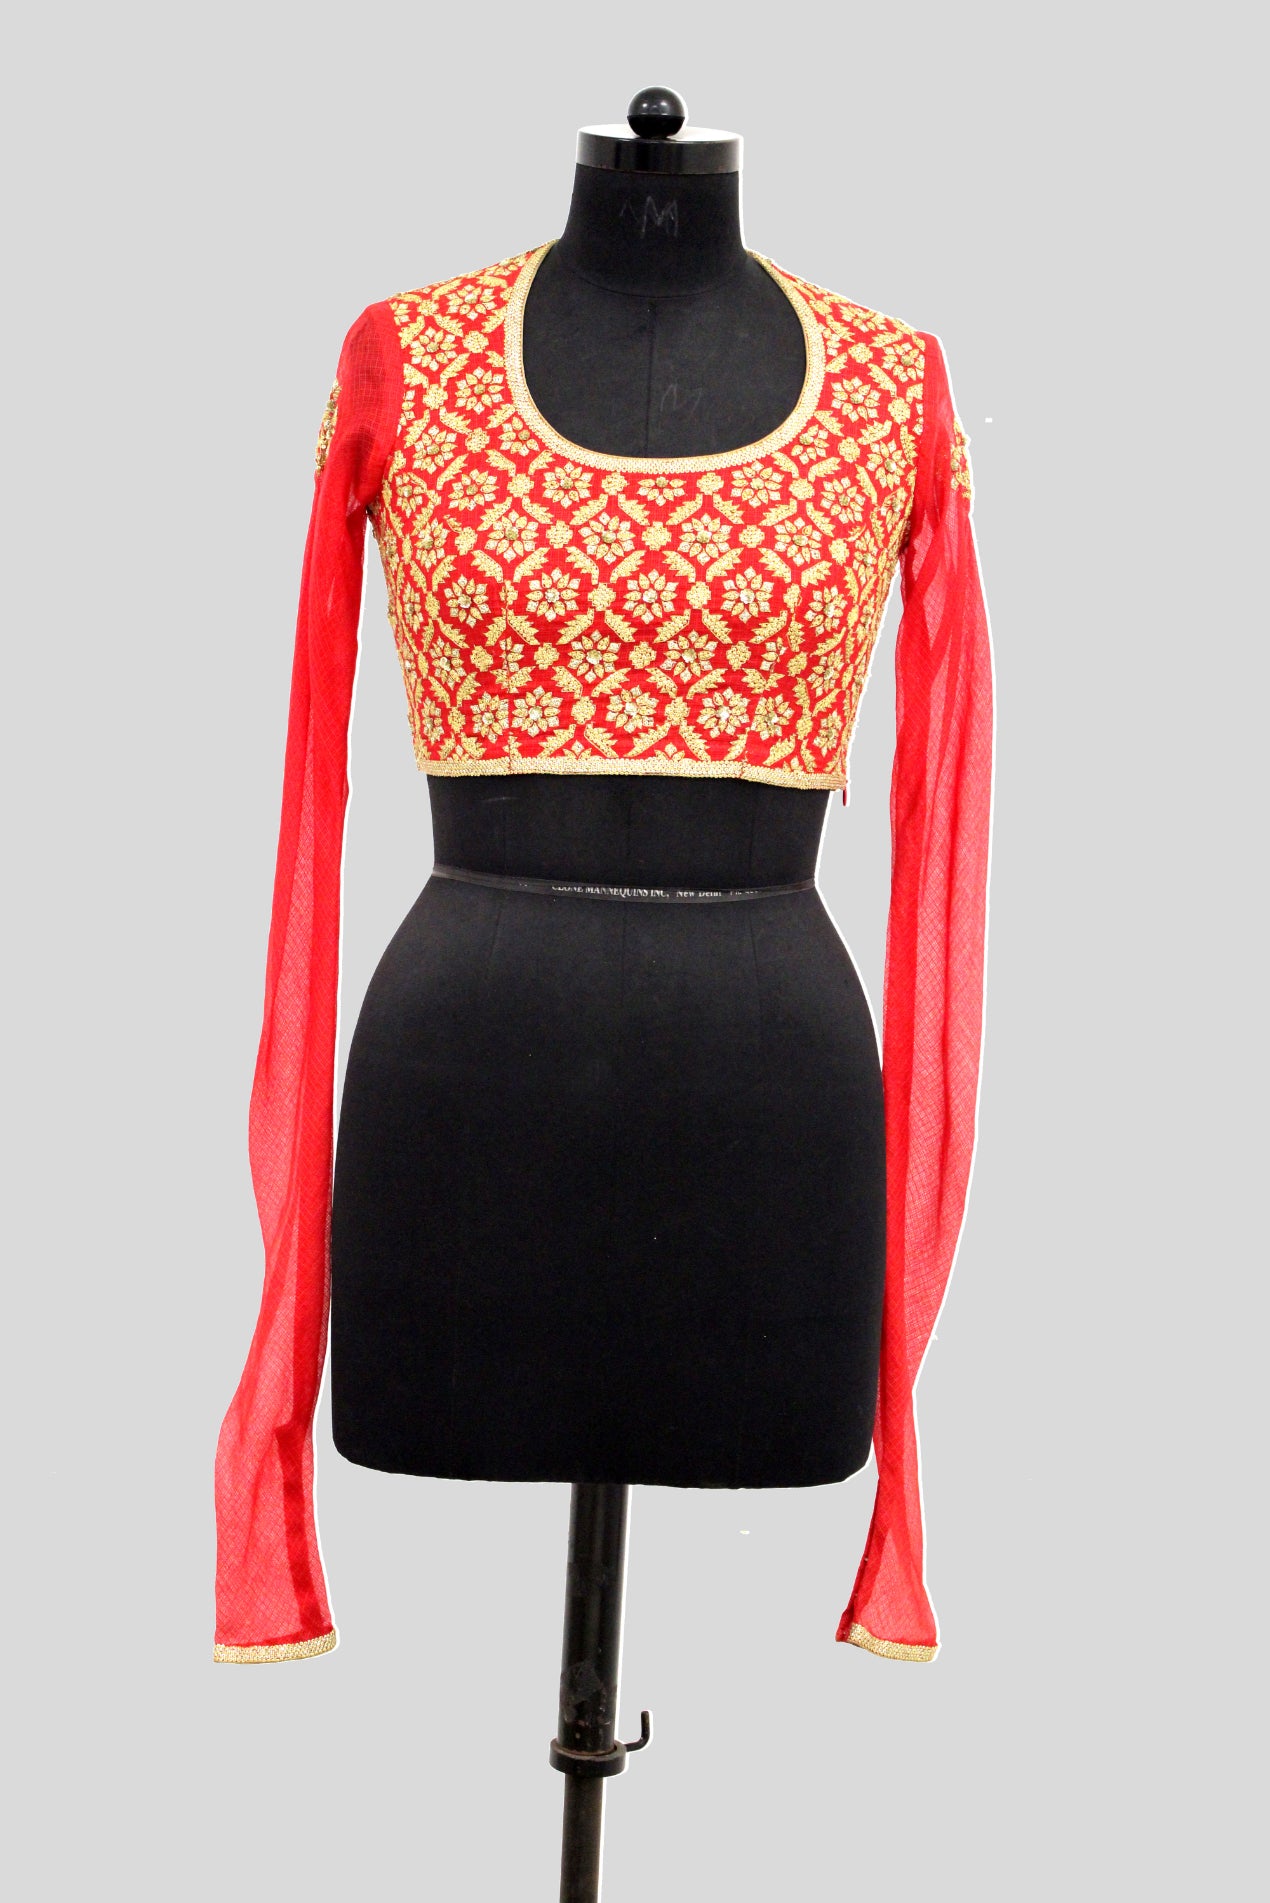 Kota Silk Flower with Geometrical Jaal Embroidery Red Chudi Blouse